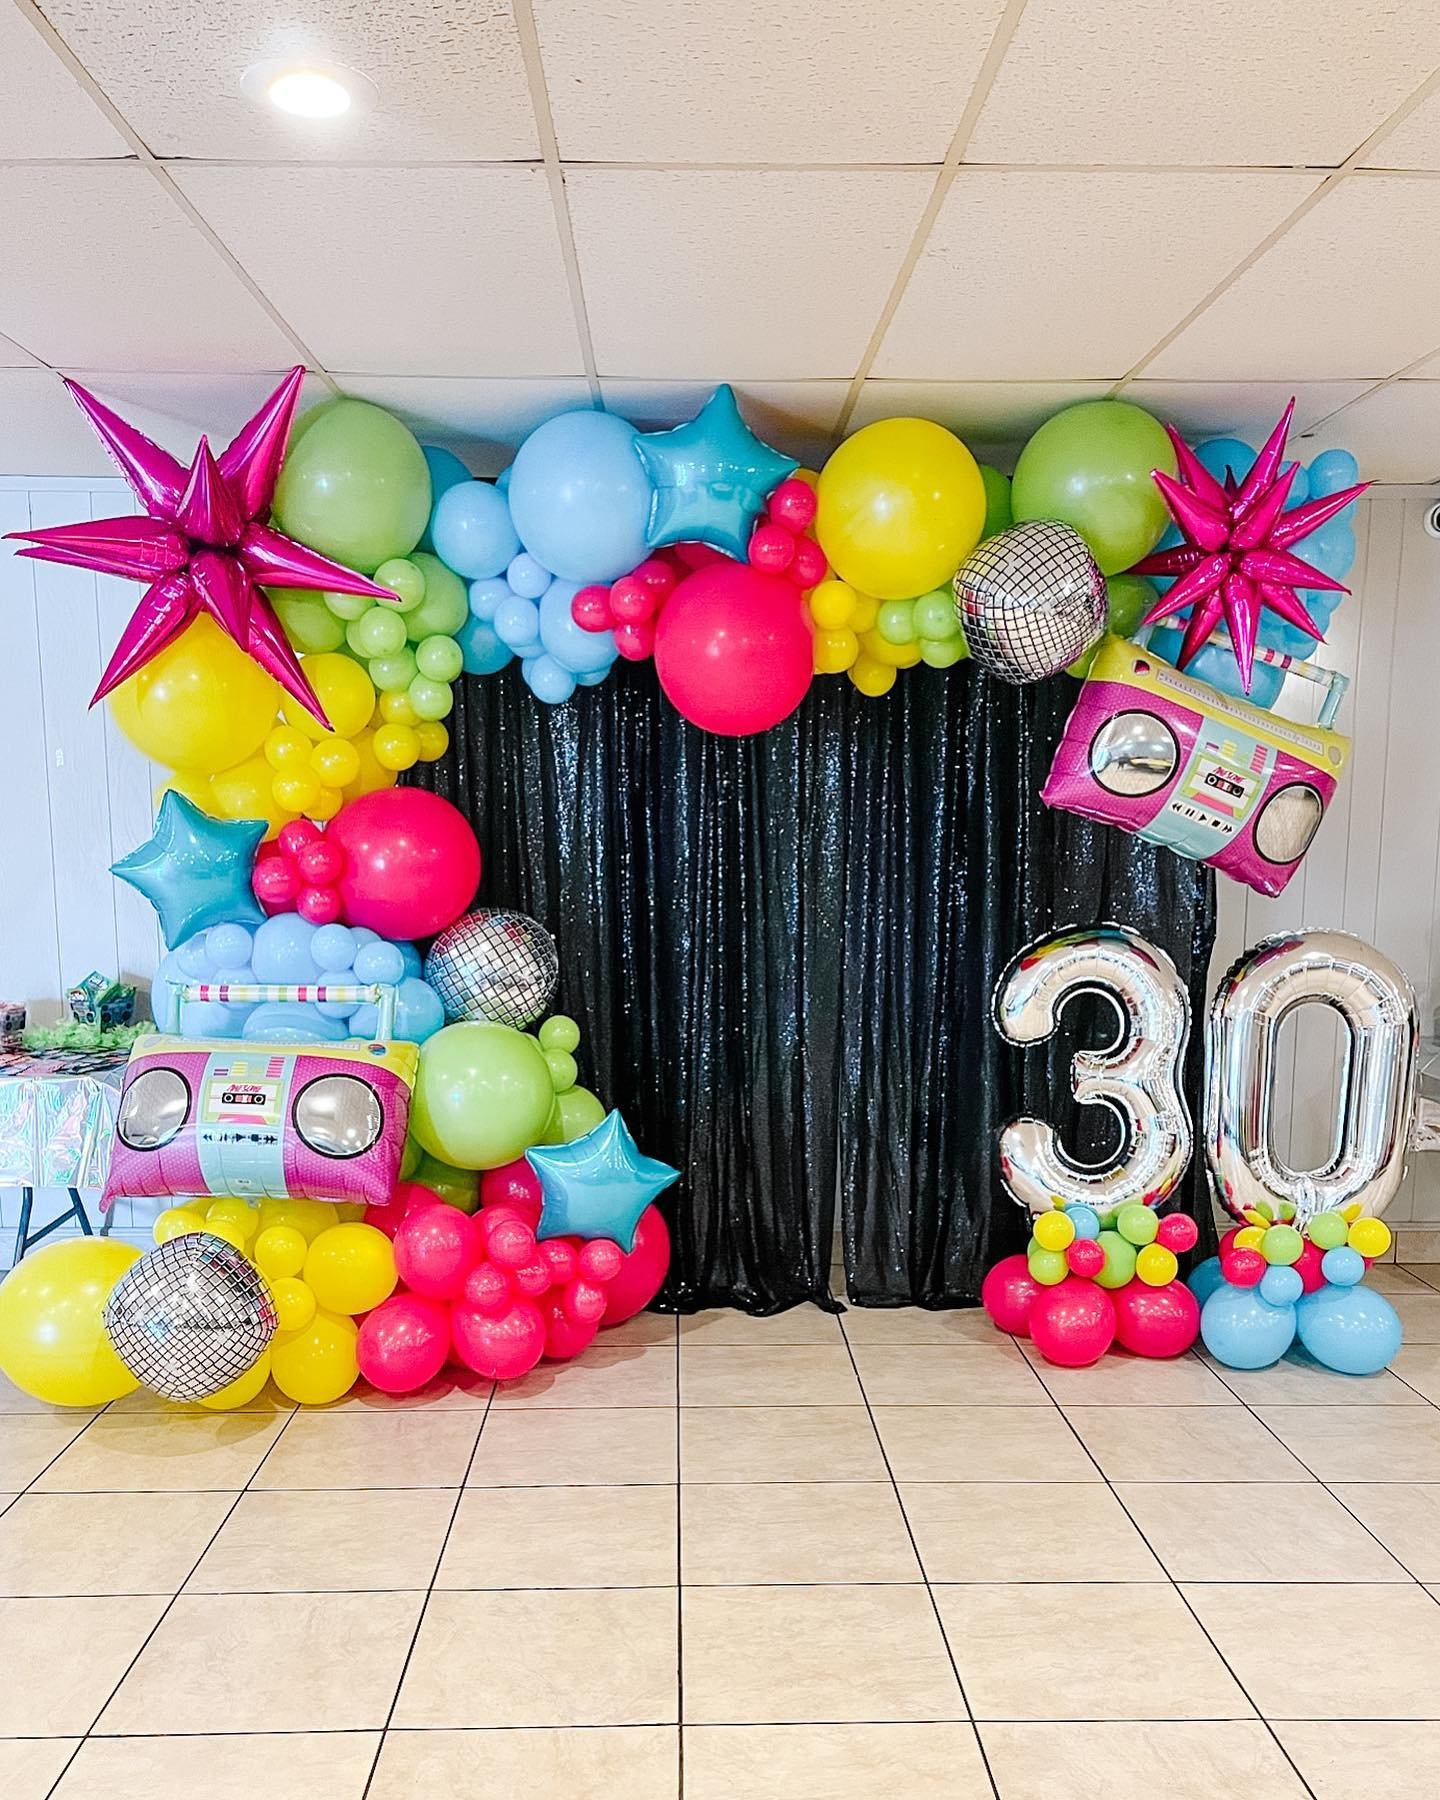 🪩 13 going on 30 🪩 
You can&rsquo;t help but want to strike a pose with fun props in front of this vibrant 80s themed backdrop for a SURPRISE 30th Birthday! We can&rsquo;t wait to help you make a show stopping balloon backdrop for your next special